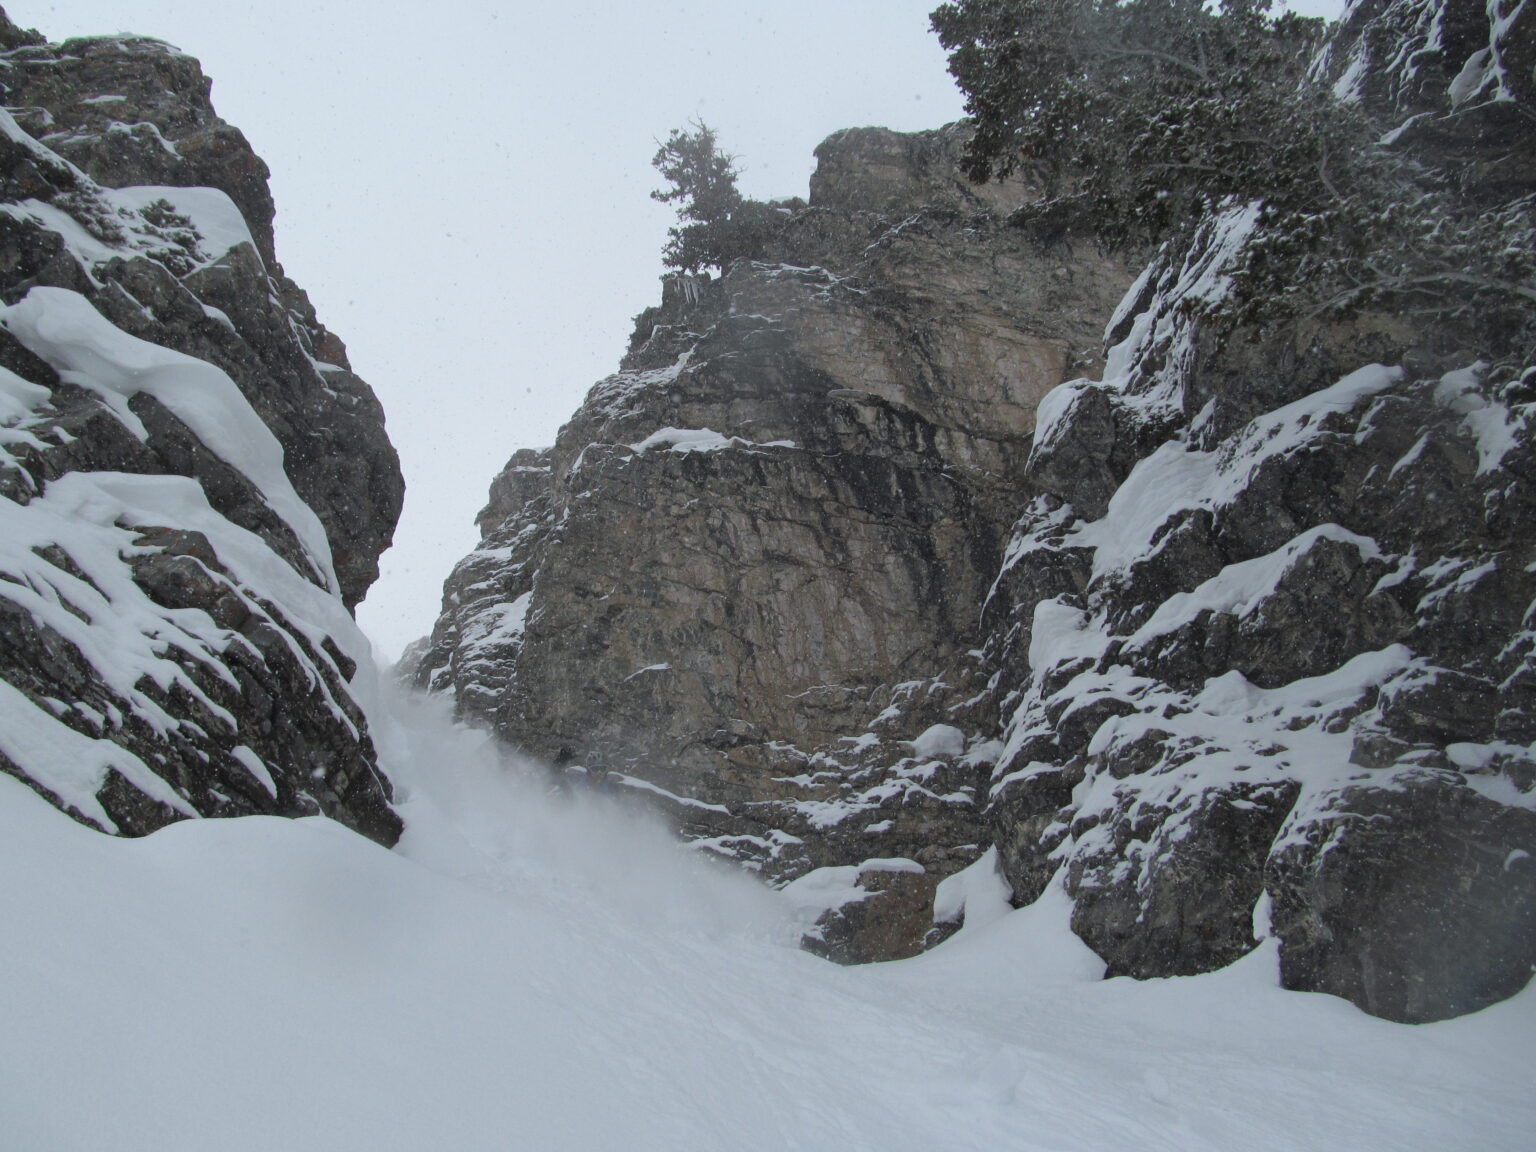 Snowboarding down the East Chute of Kesler Peak in power conditions